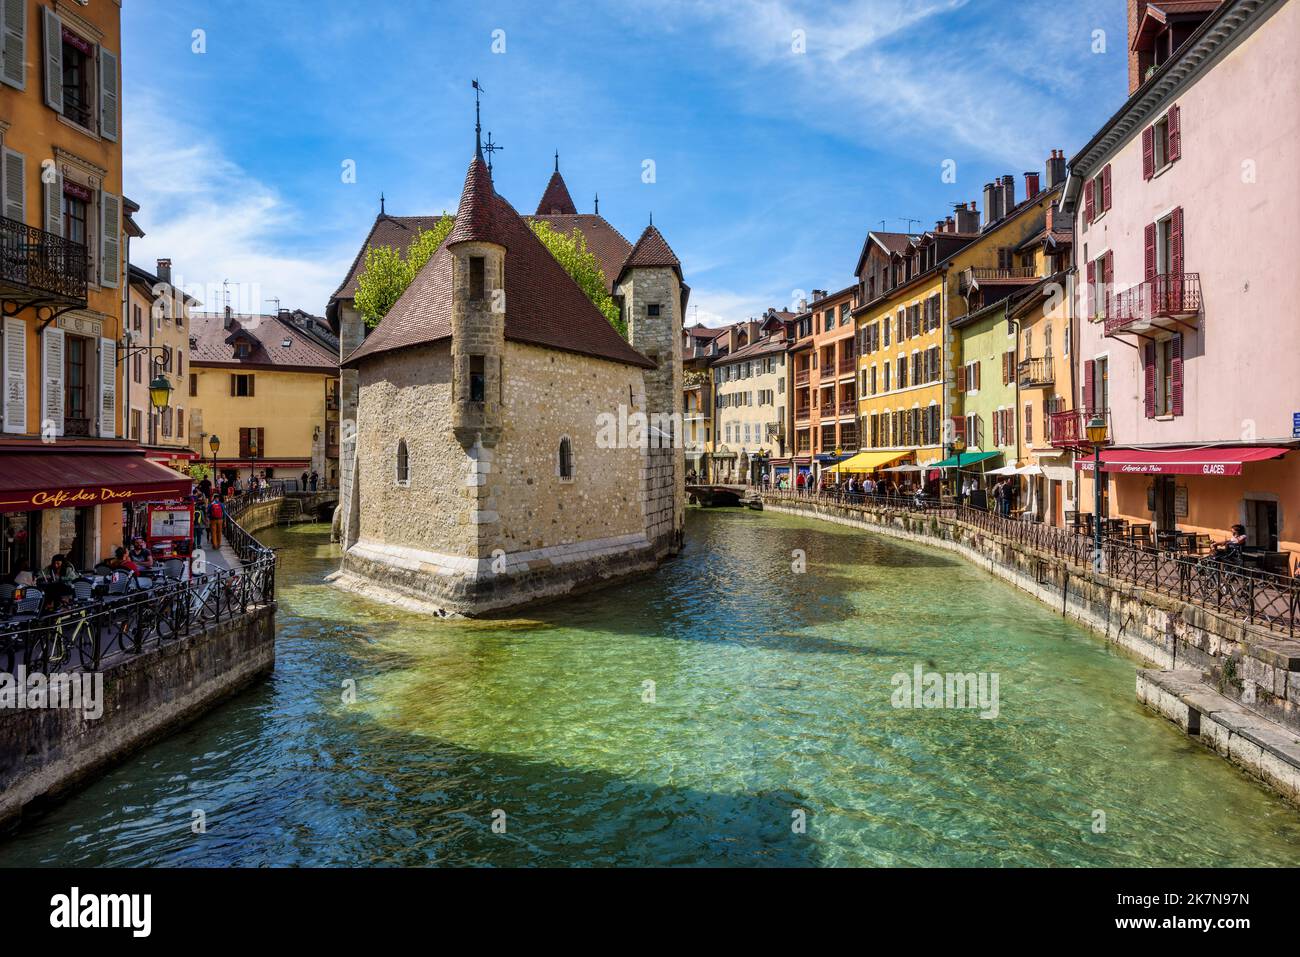 Annecy, France - 19 April 2022: Palais de l’Isle, a medieval stone house on river Thiou, is the main landmark and a popular tourist attraction in Anne Stock Photo